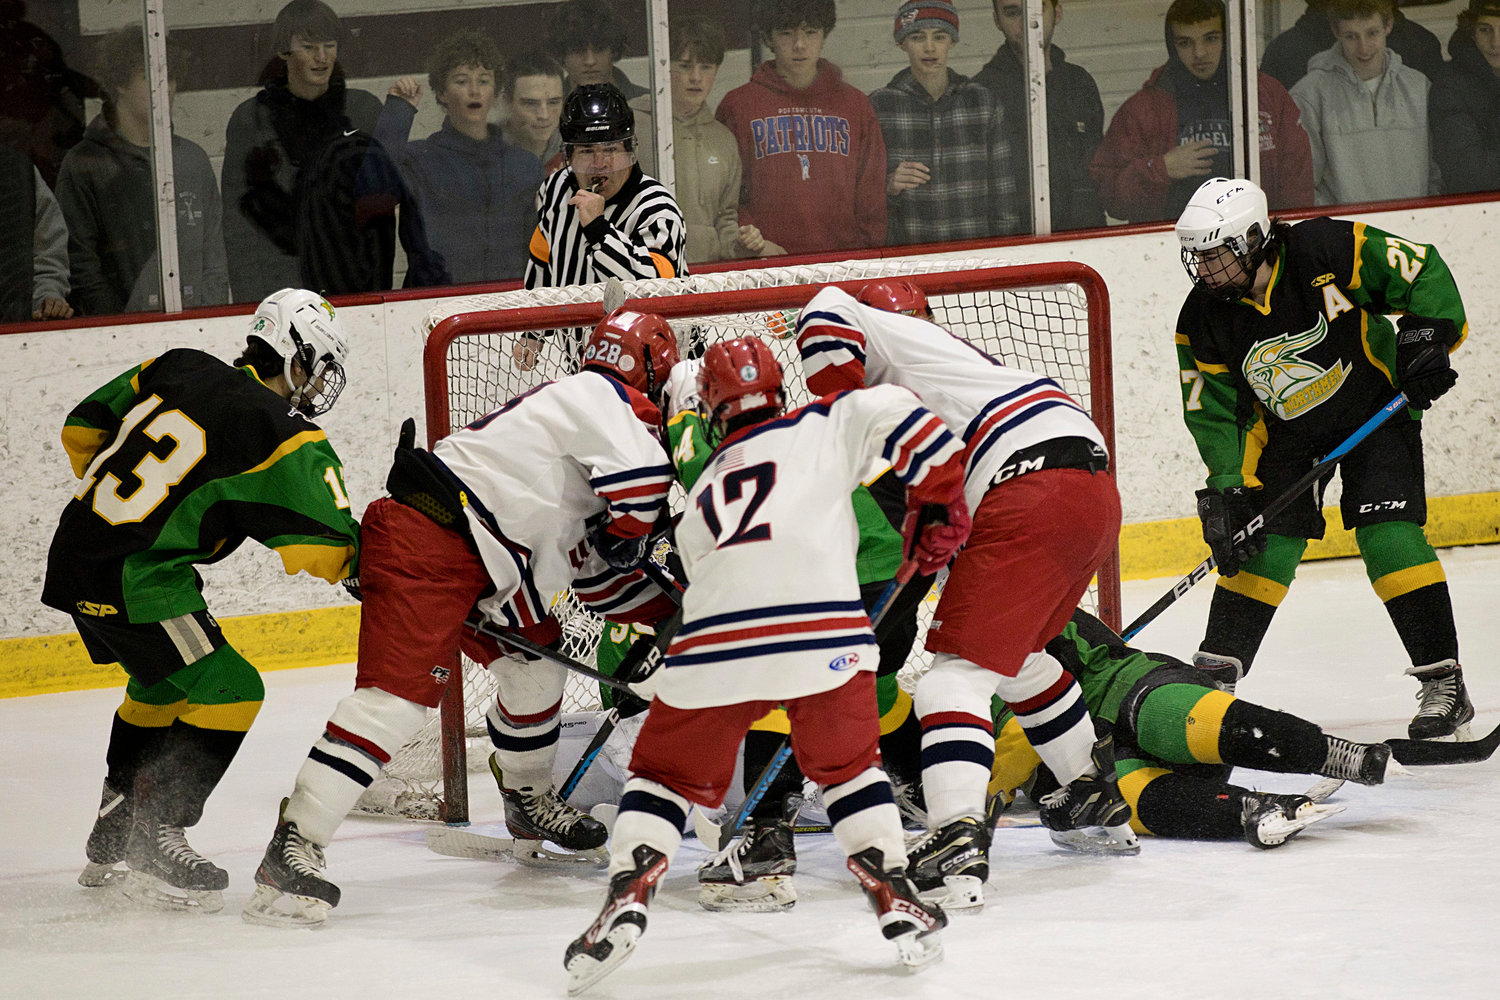 Patriots players create chaos in front of the Northmen’s net in an attempt to score.